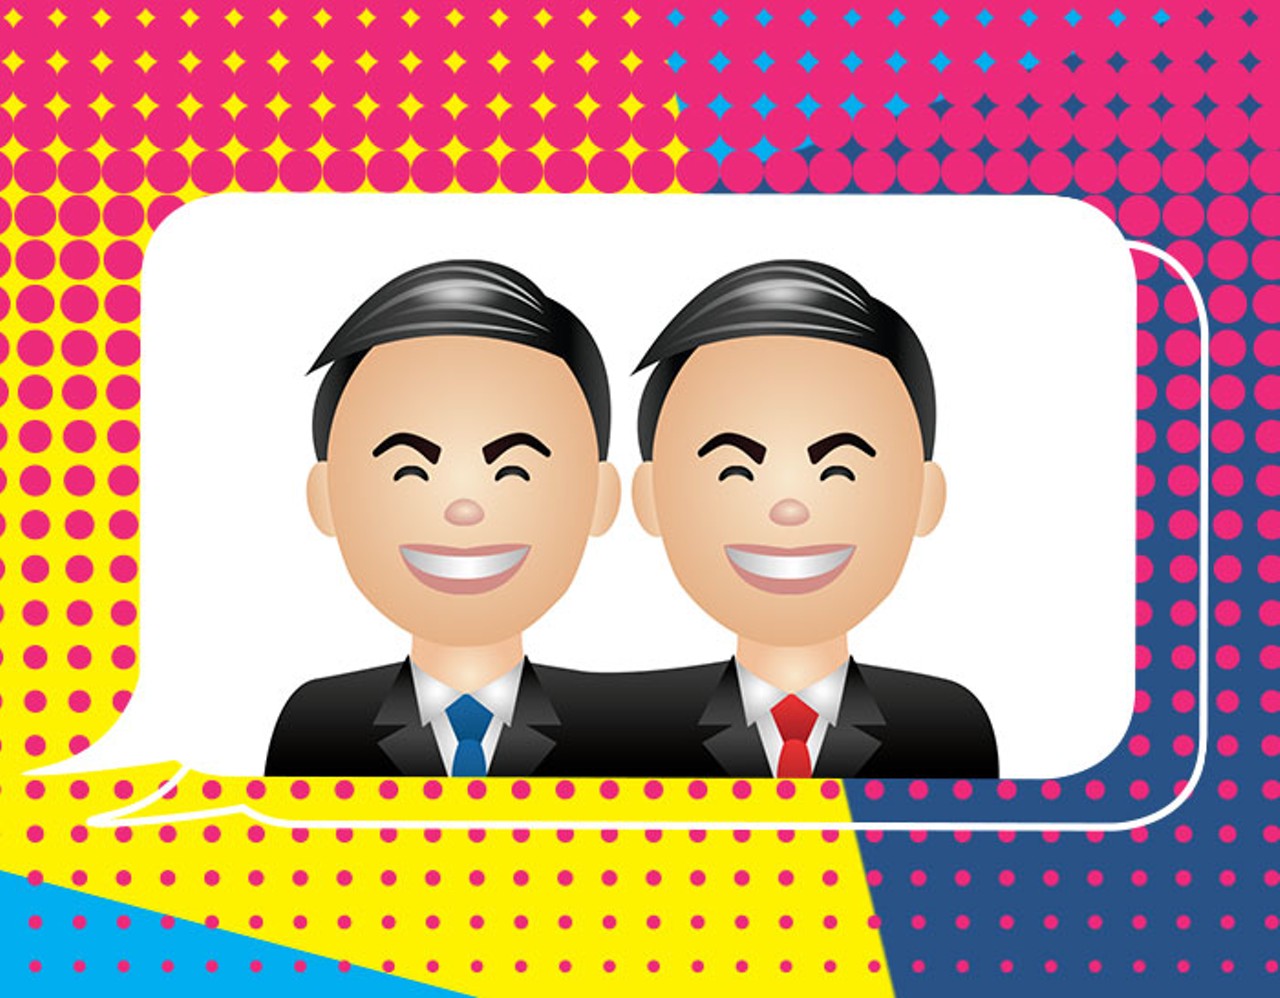 The Castro Twins
When to use it: A quick and easy shorthand for San Antonio&#146;s most powerful twins. Both Congressman Joaquin and Housing and Urban Development Secretary Juli&aacute;n are rumored to be vice presidential candidates for Hillary Clinton. If it happens, you&#146;ll need this emoji. If it doesn&#146;t happen, you&#146;ll still need this emoji &#151; because these guys aren&#146;t going anywhere anytime soon. Also a polite way to indicate that twins are creepy.